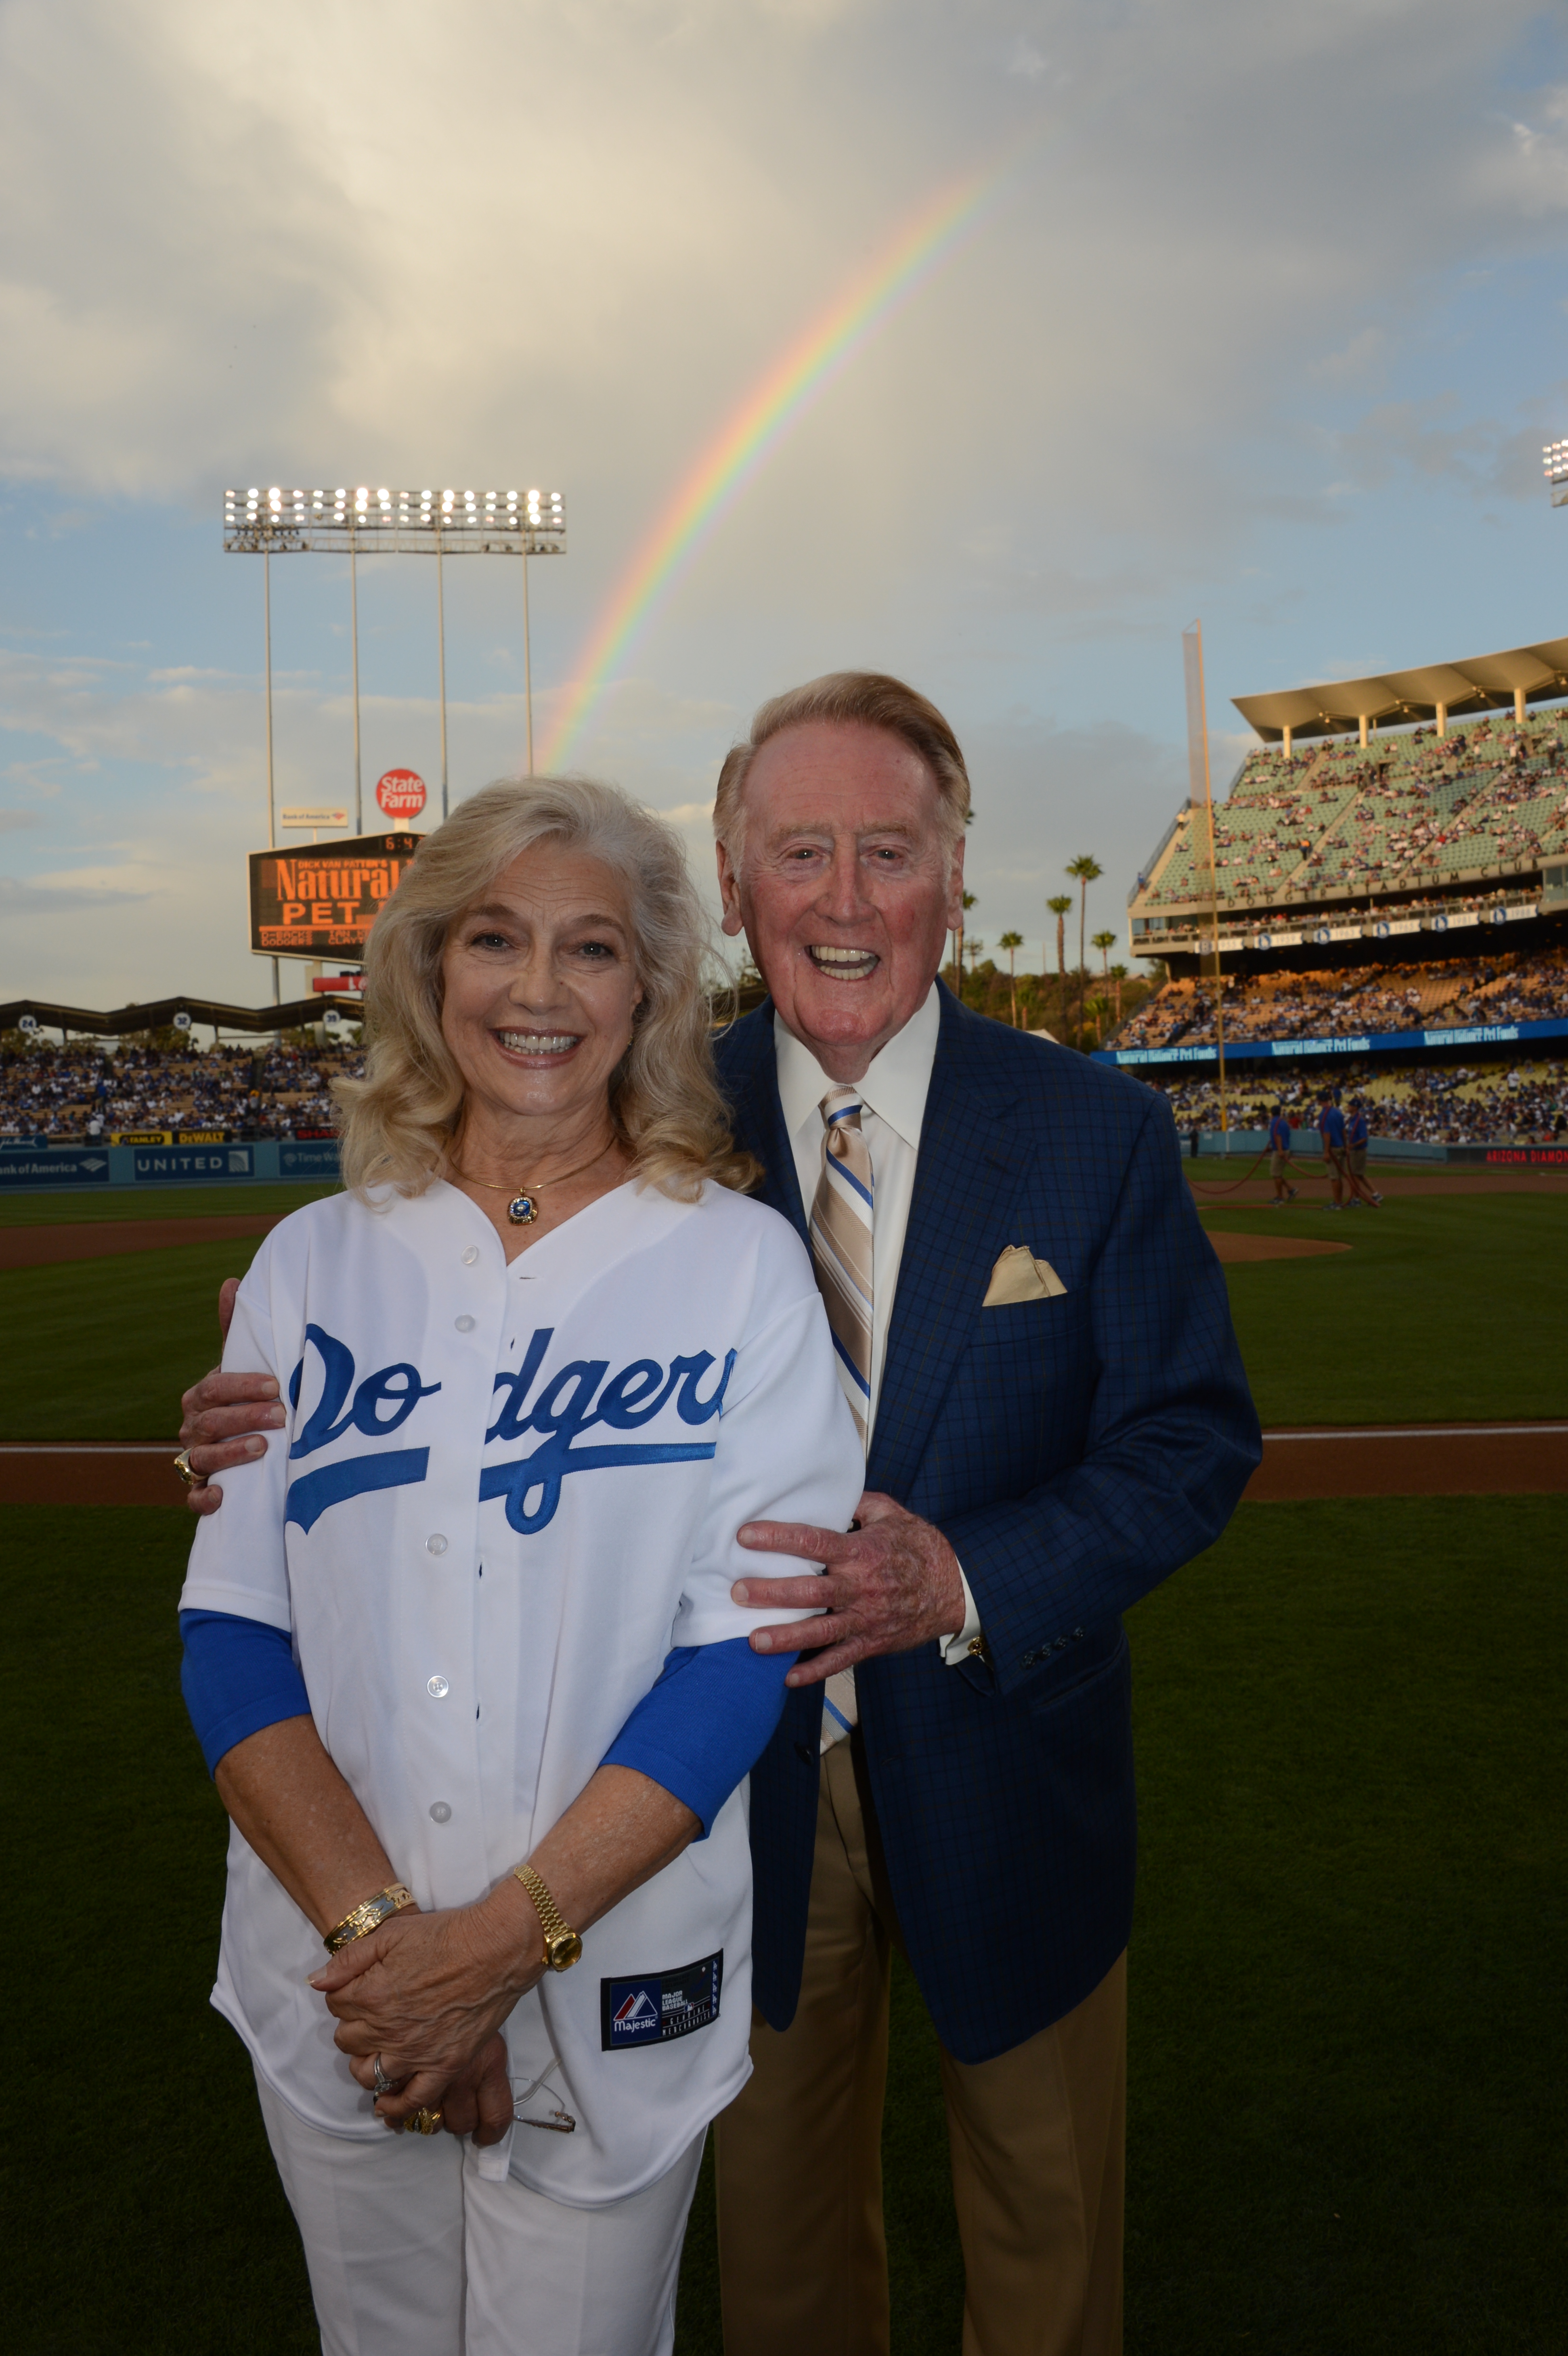 Vin Scully on taking Route 66: 'I wanted to wear Yasiel Puig's jersey